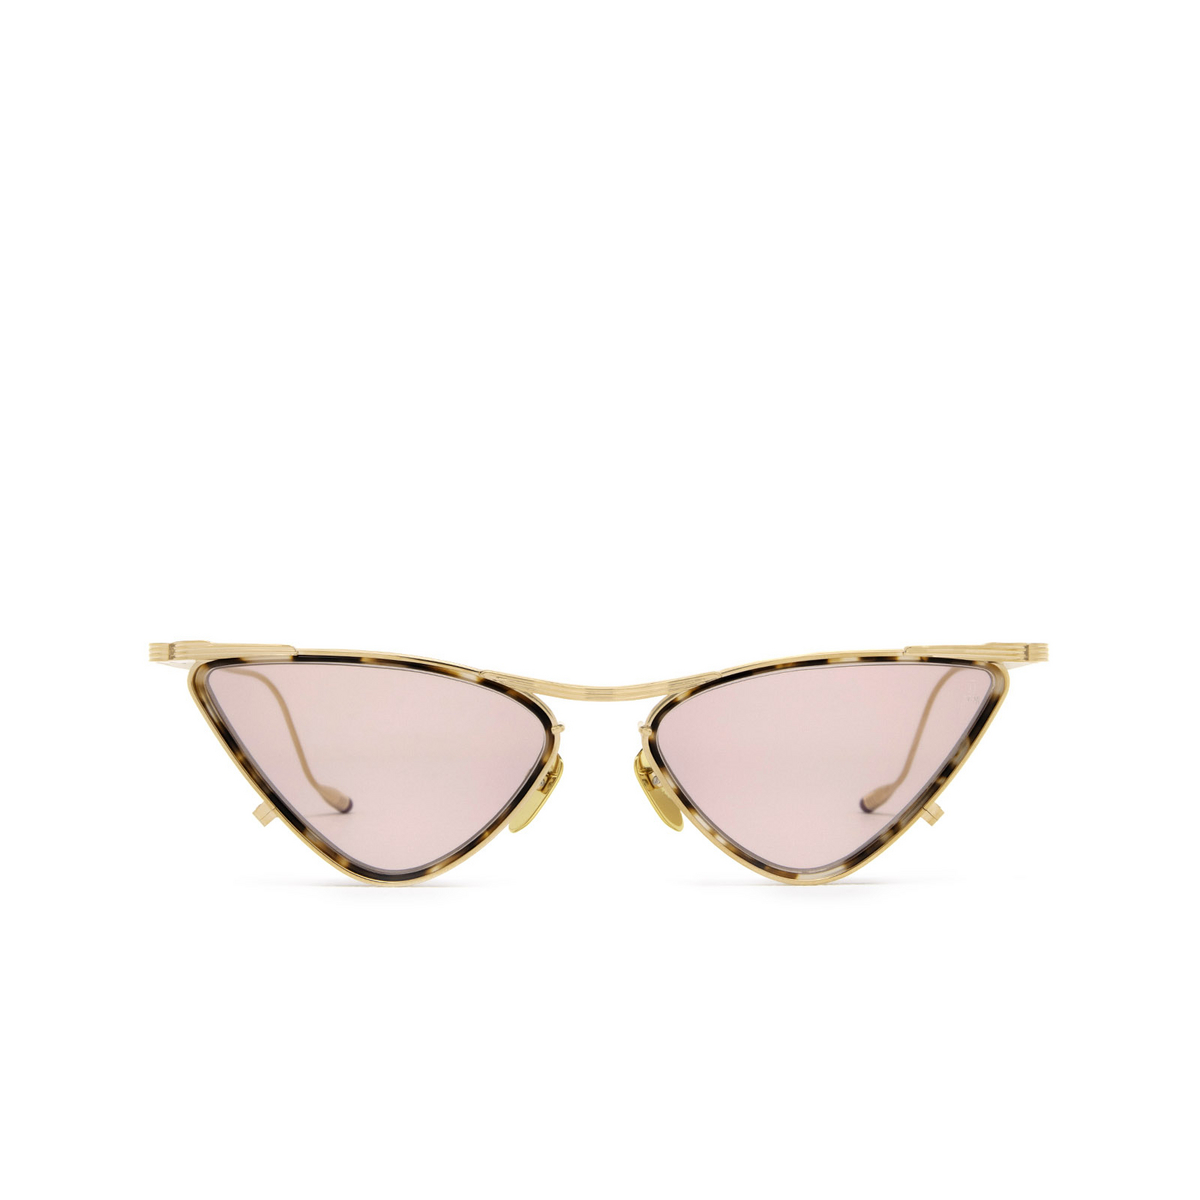 Jacques Marie Mage® Cat-eye Sunglasses: Niki color Nude - front view